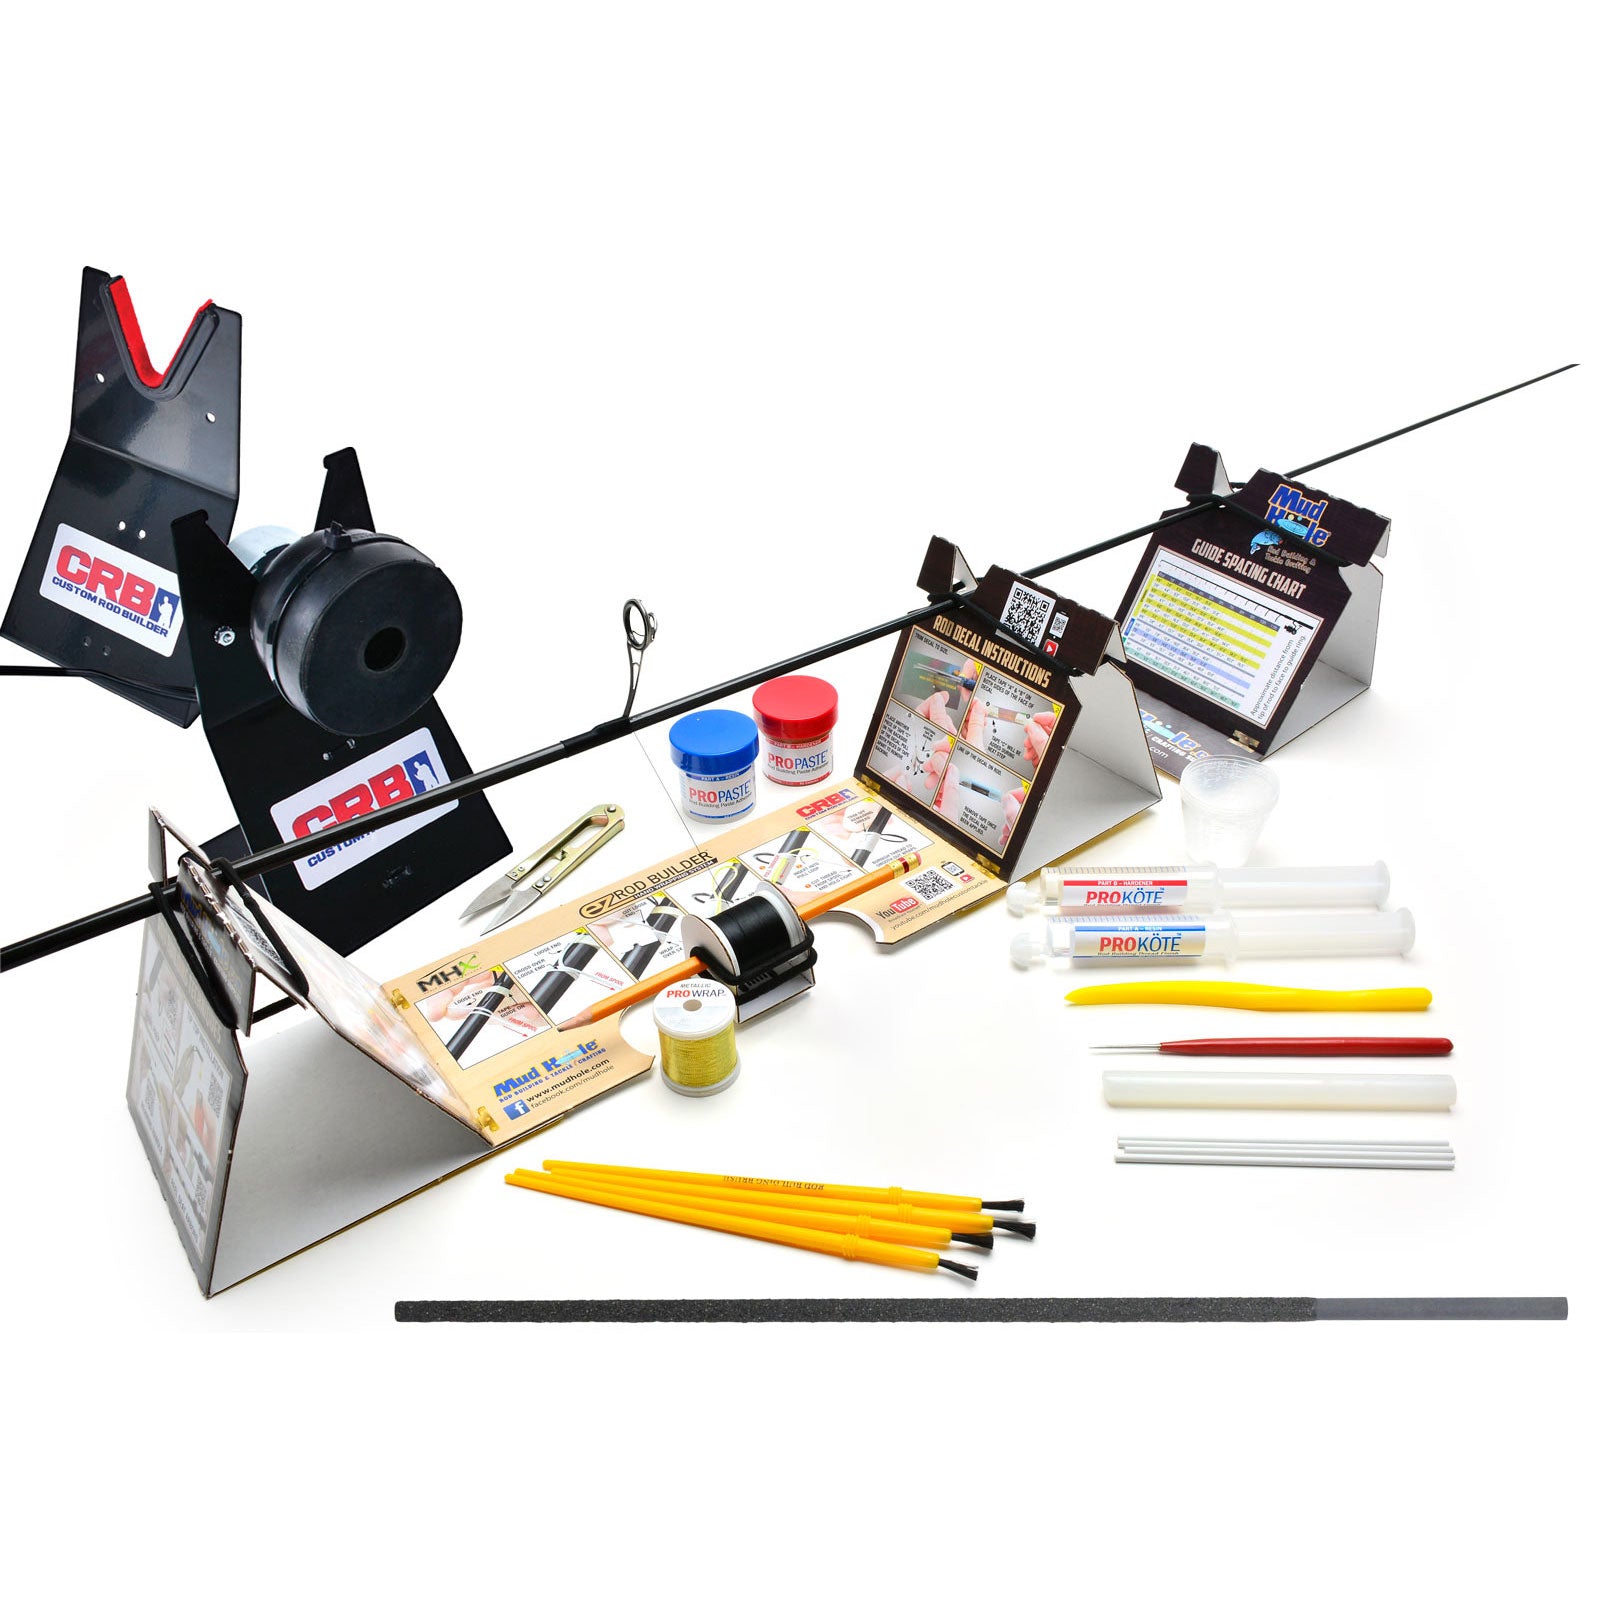 Guide Kits for Rod Building - Free Shipping